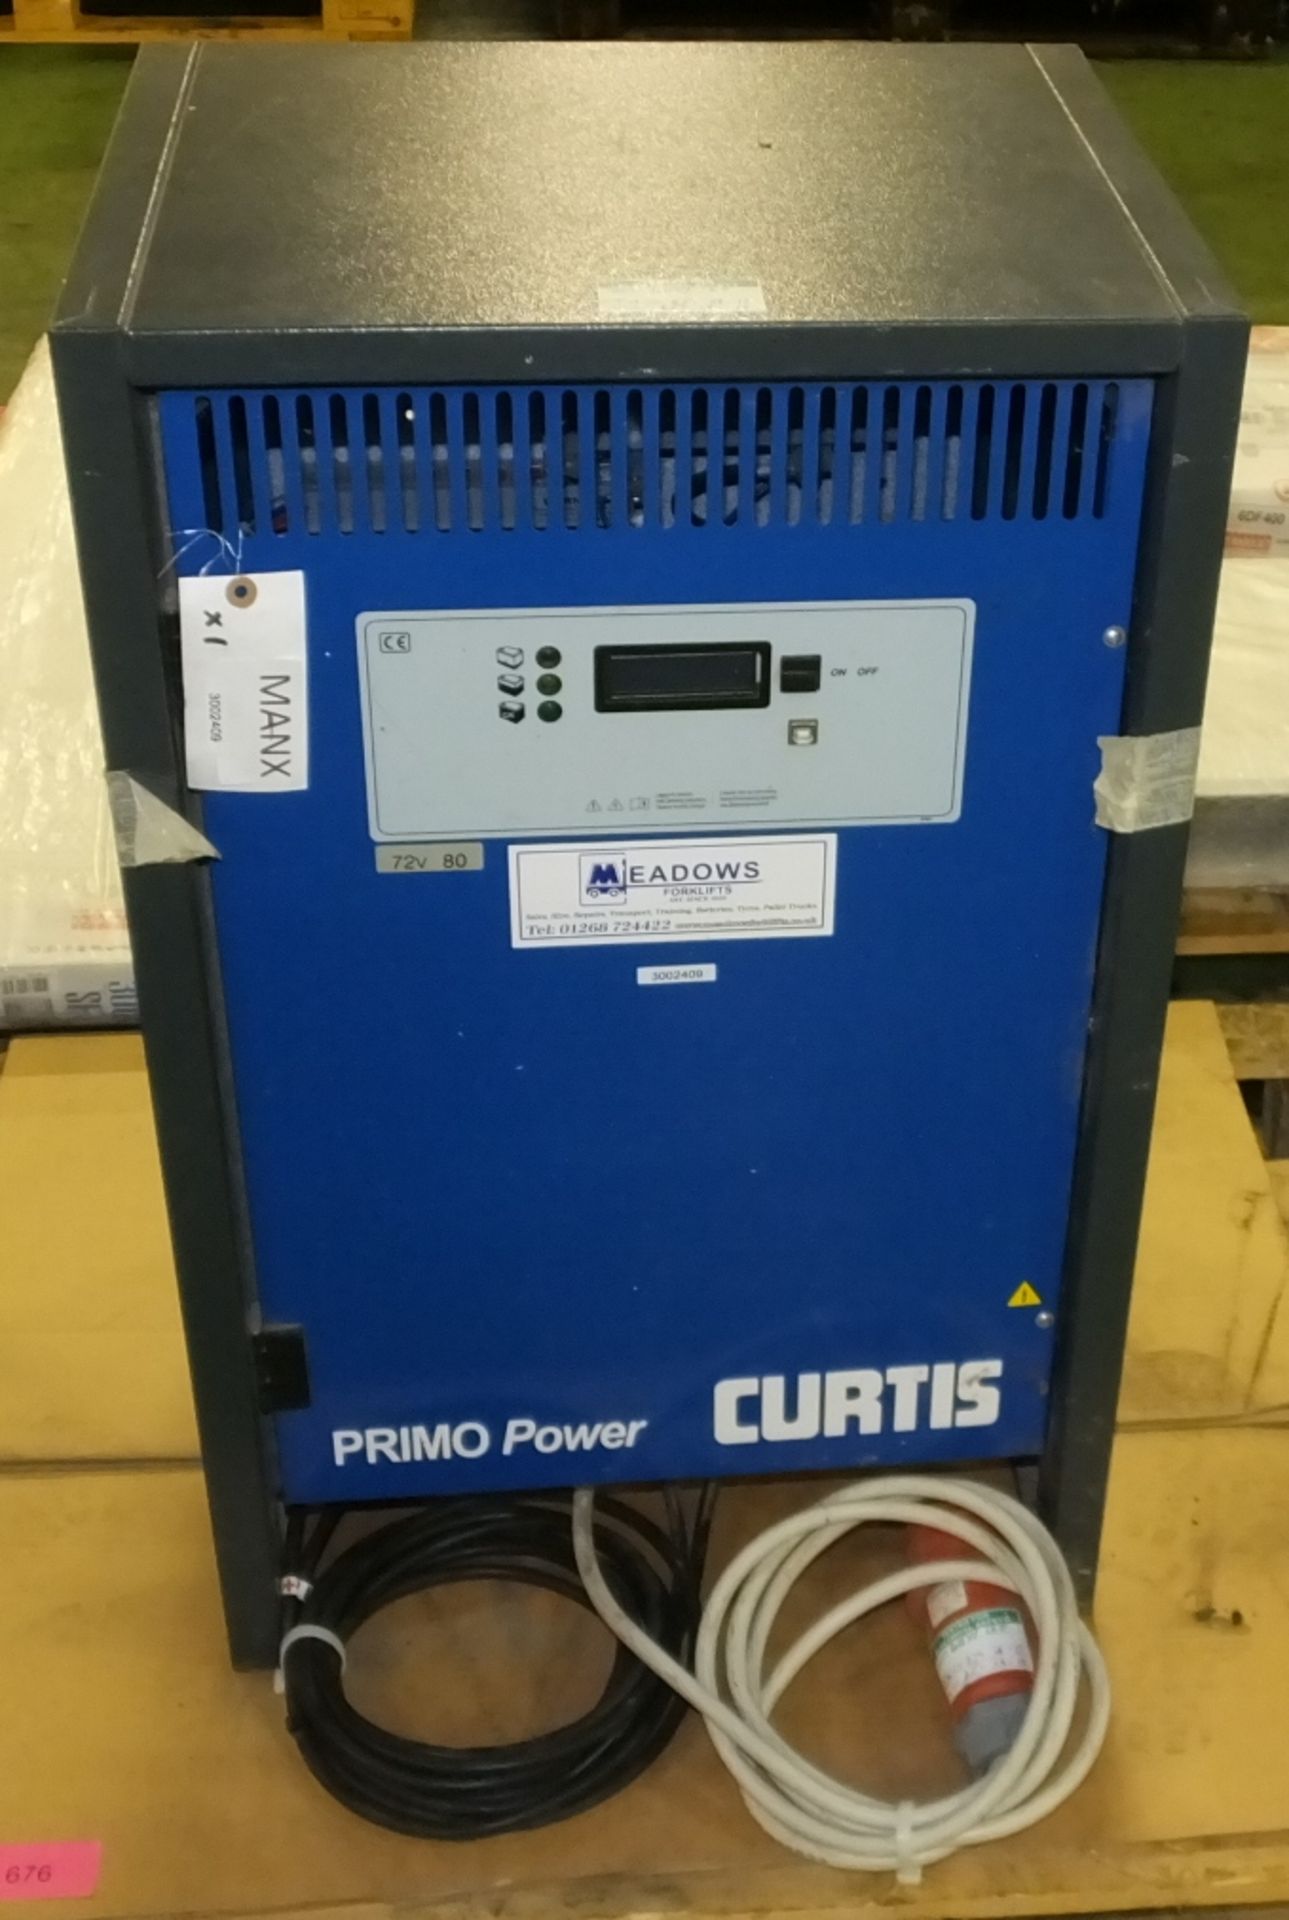 Curtis Primo Power Charger Unit 72v 80A